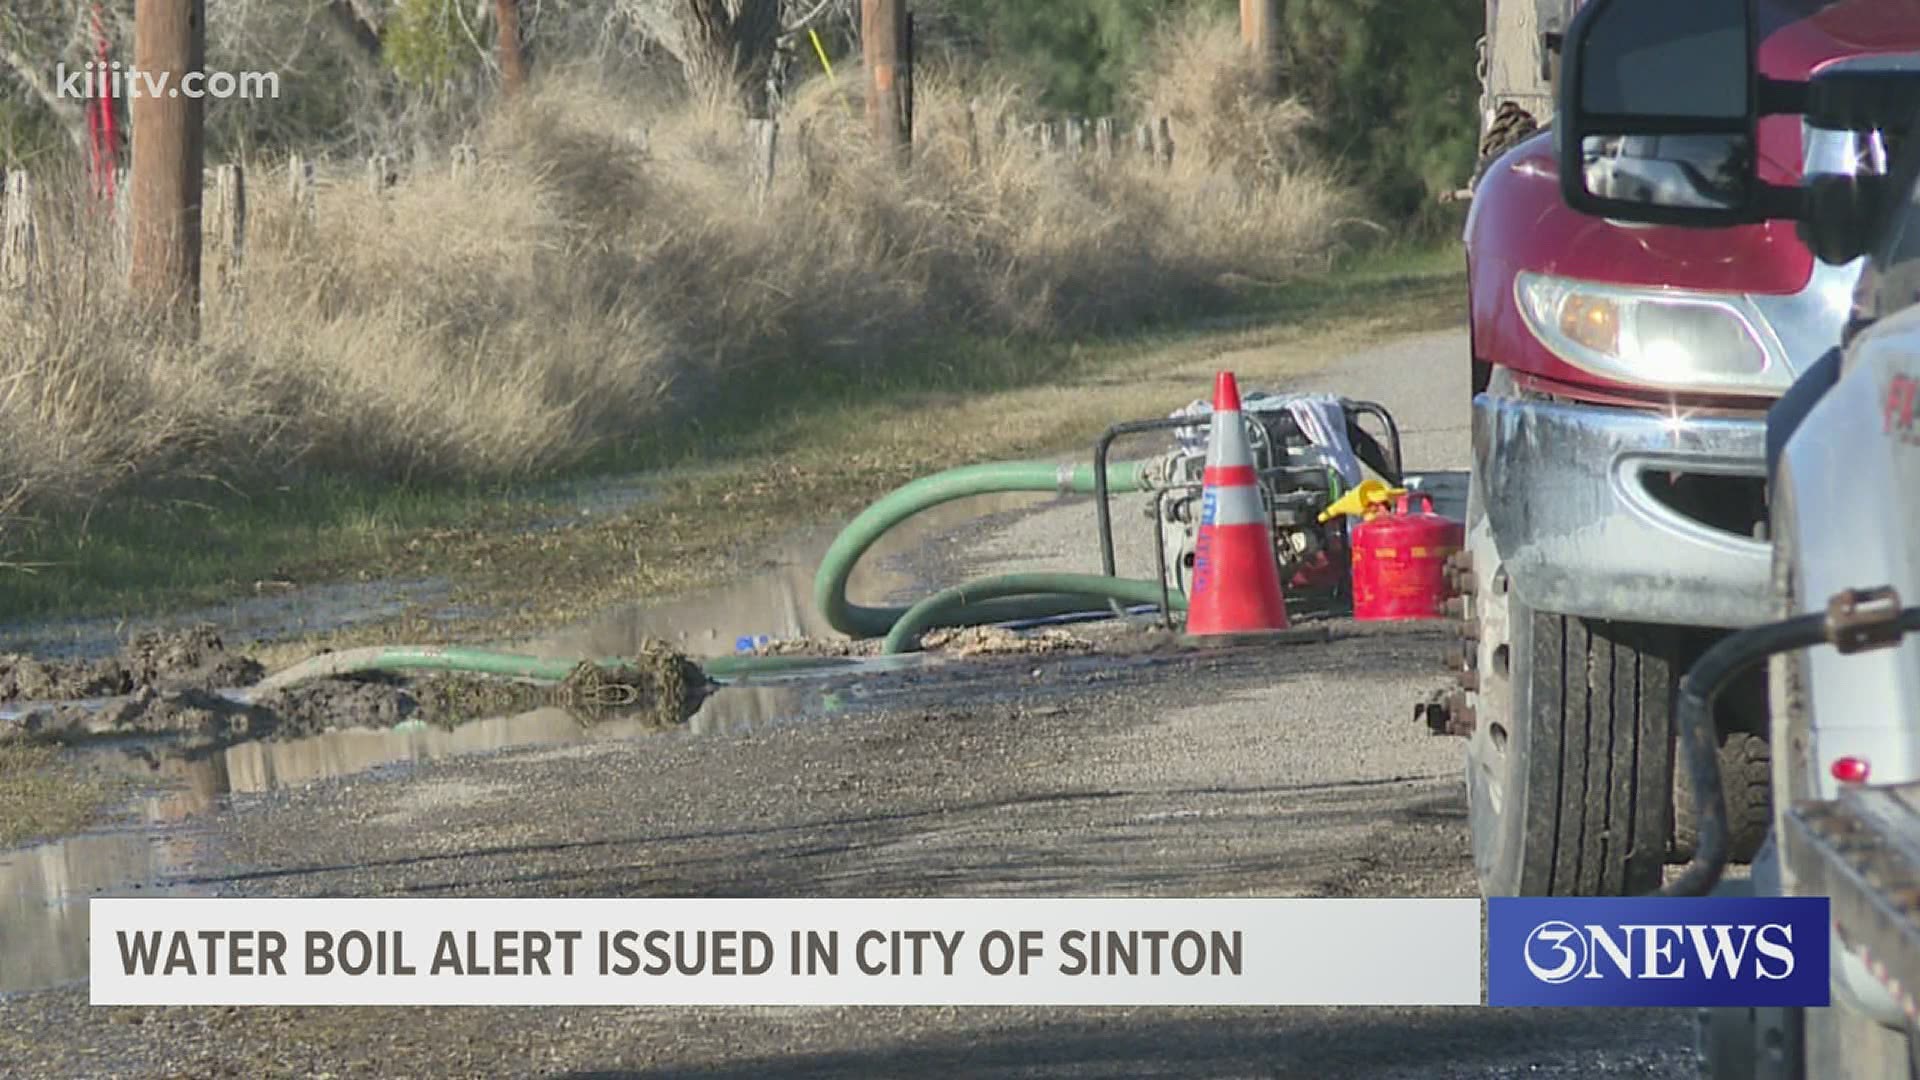 Crews said the water pressure would return slowly throughout the evening, but it will still be necessary to boil water before consuming or using it to cook.